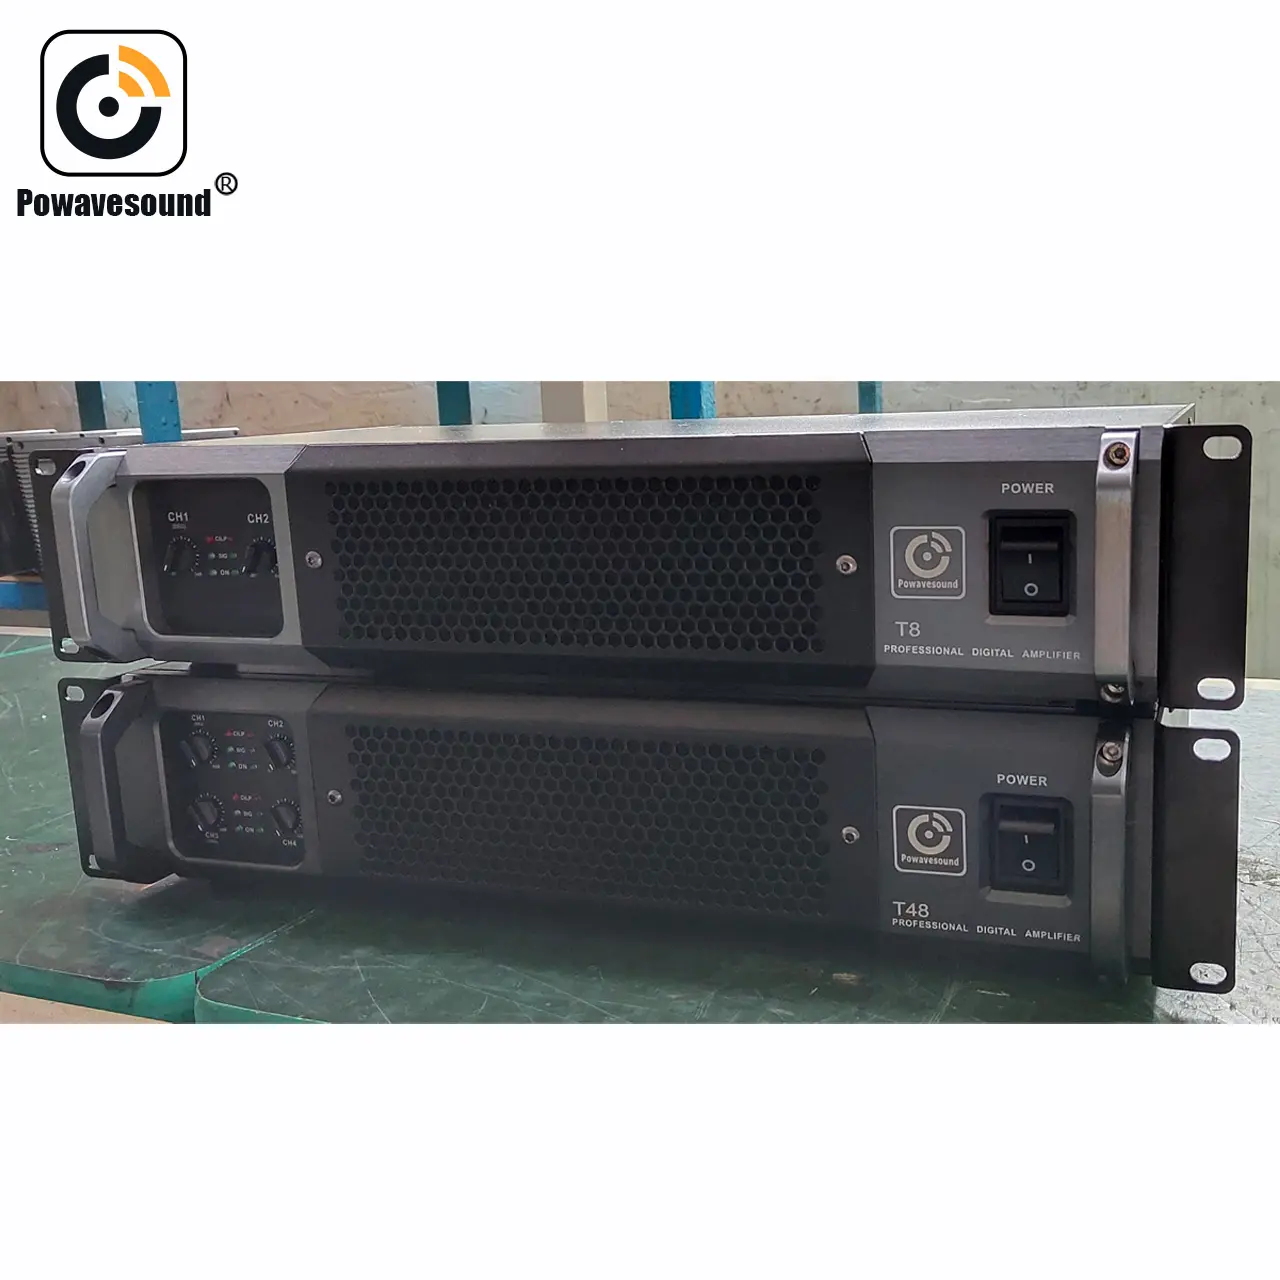 Low cost high quality professional digital power amplifier 1300W for touring sound live show 600W 800W KTV speaker amplifier